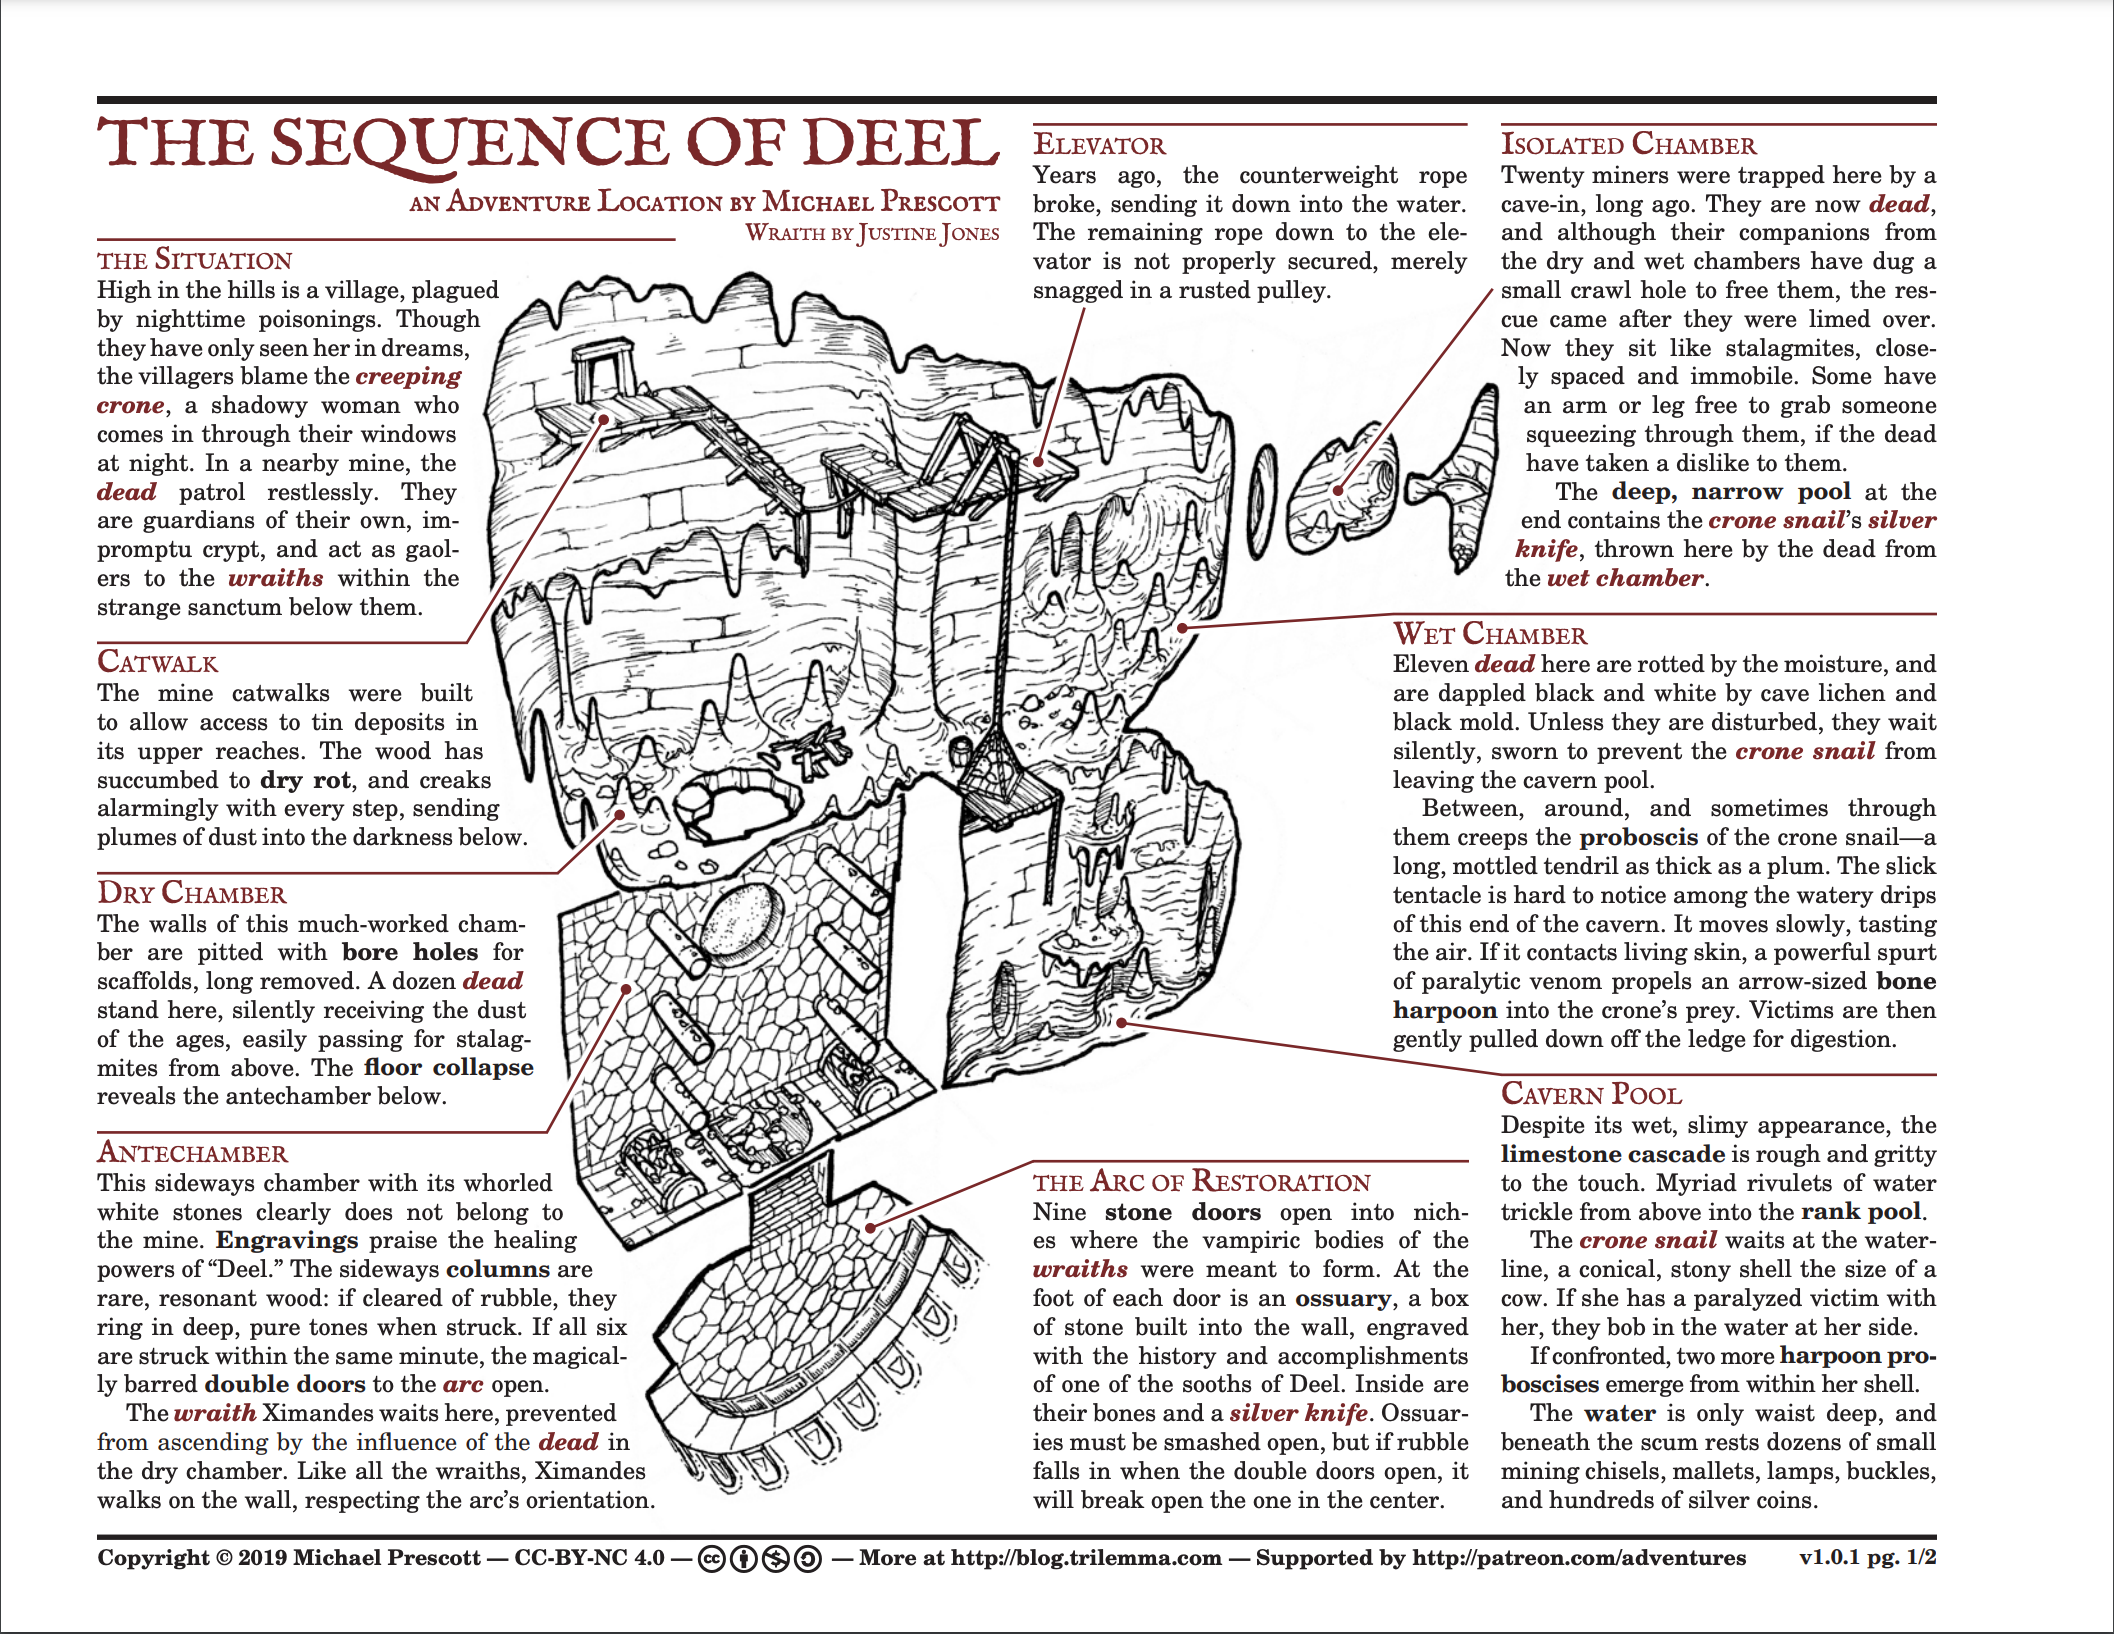 The Sequence of Deel by Michael Prescott